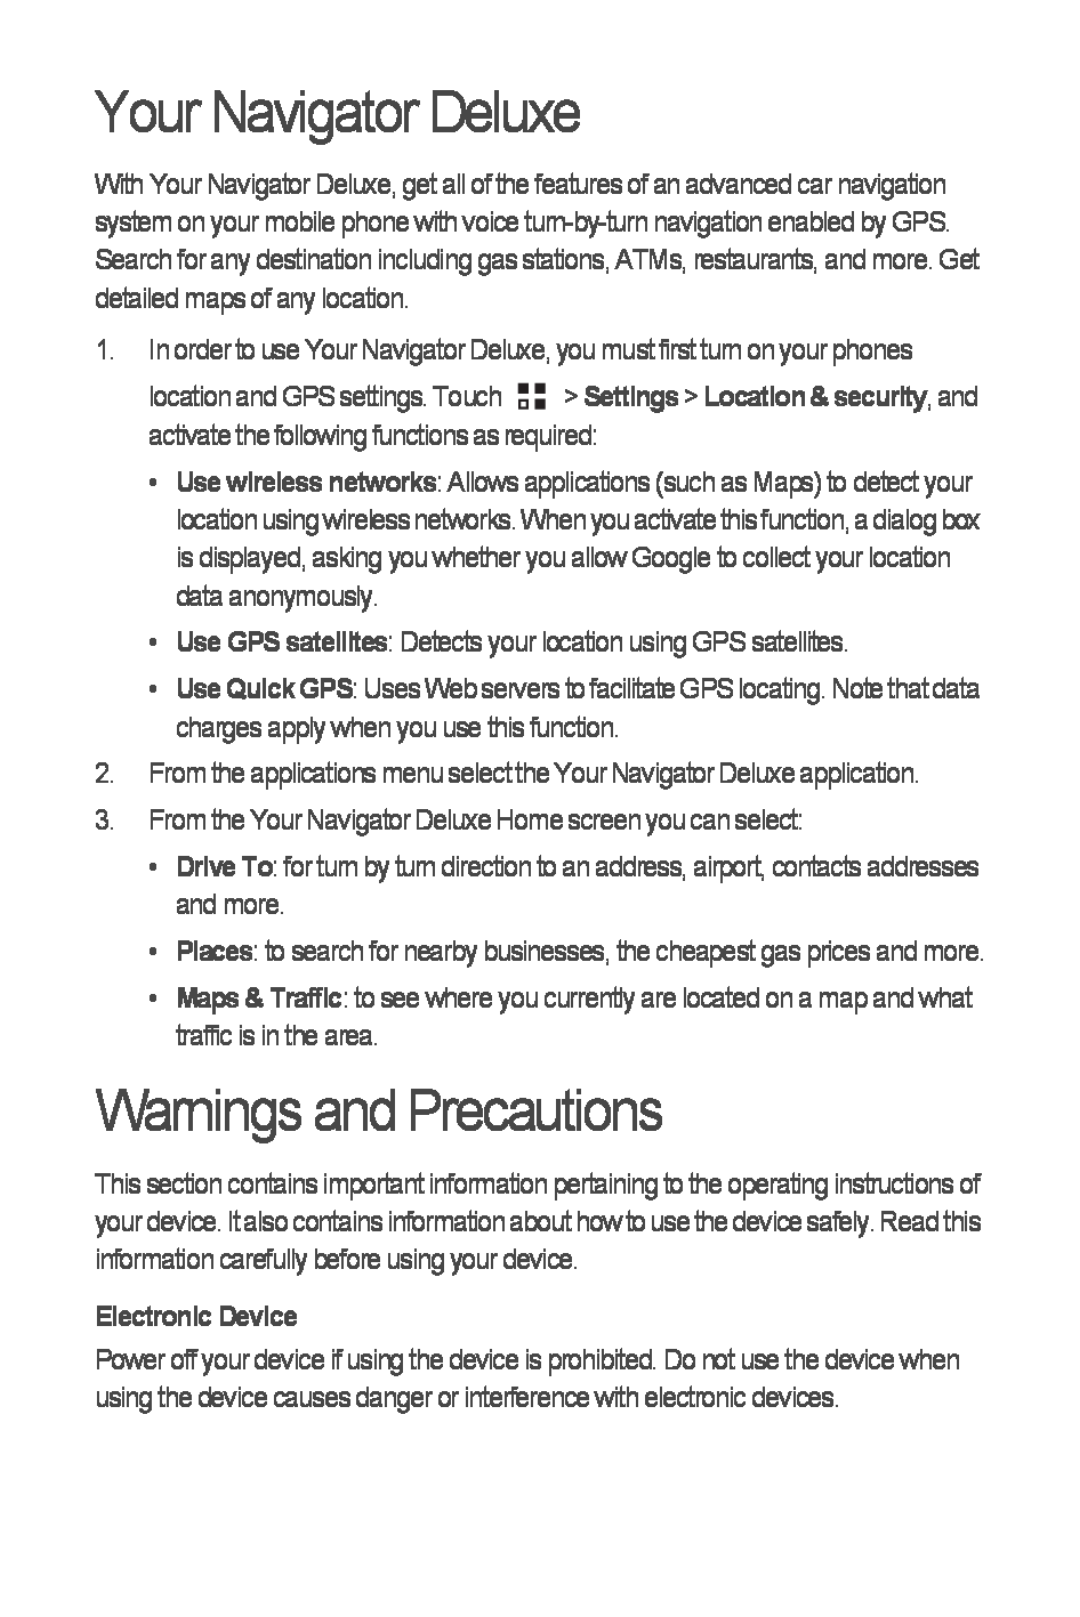 Huawei M866 quick start Your Navigator Deluxe, Warnings and Precautions, Electronic Device 